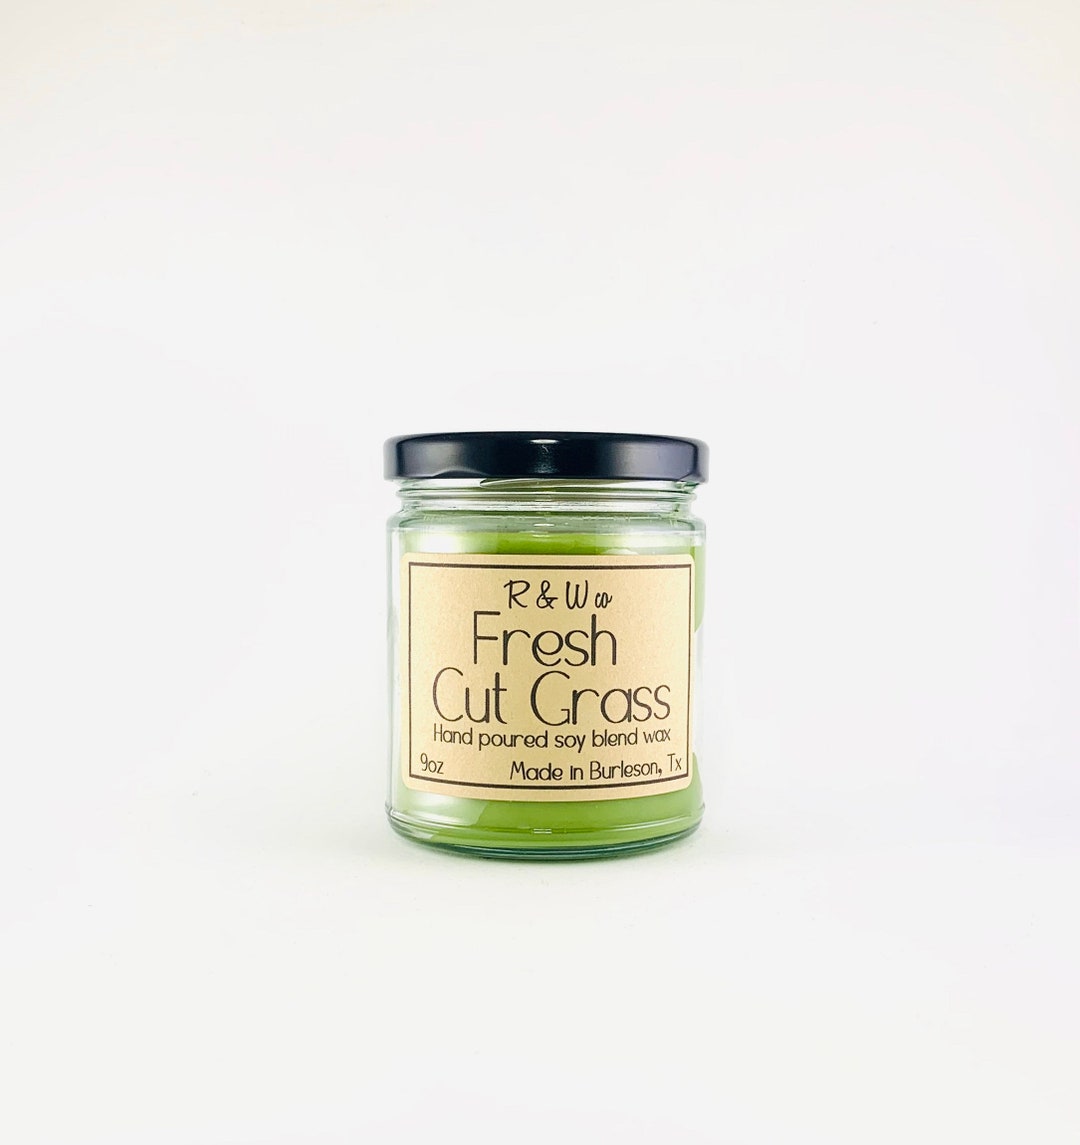 Cut Grass & Seaweed Amazing Quality Fragrance Oils Soy Wax Vegan Scented  Candle in Apothecary Jars -  UK